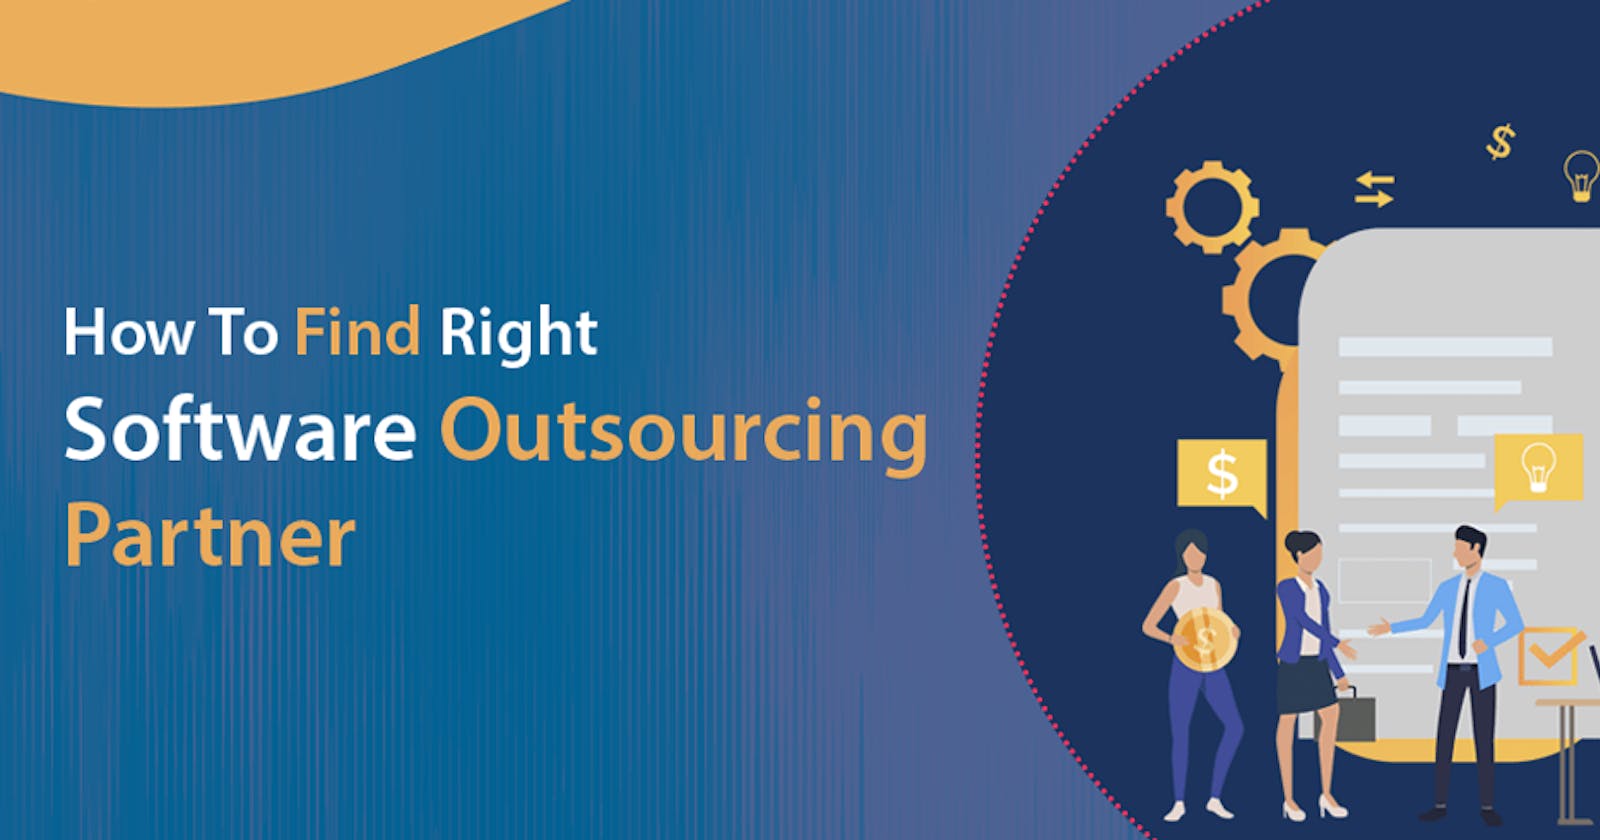 How To Find the Right Software Outsourcing Partner